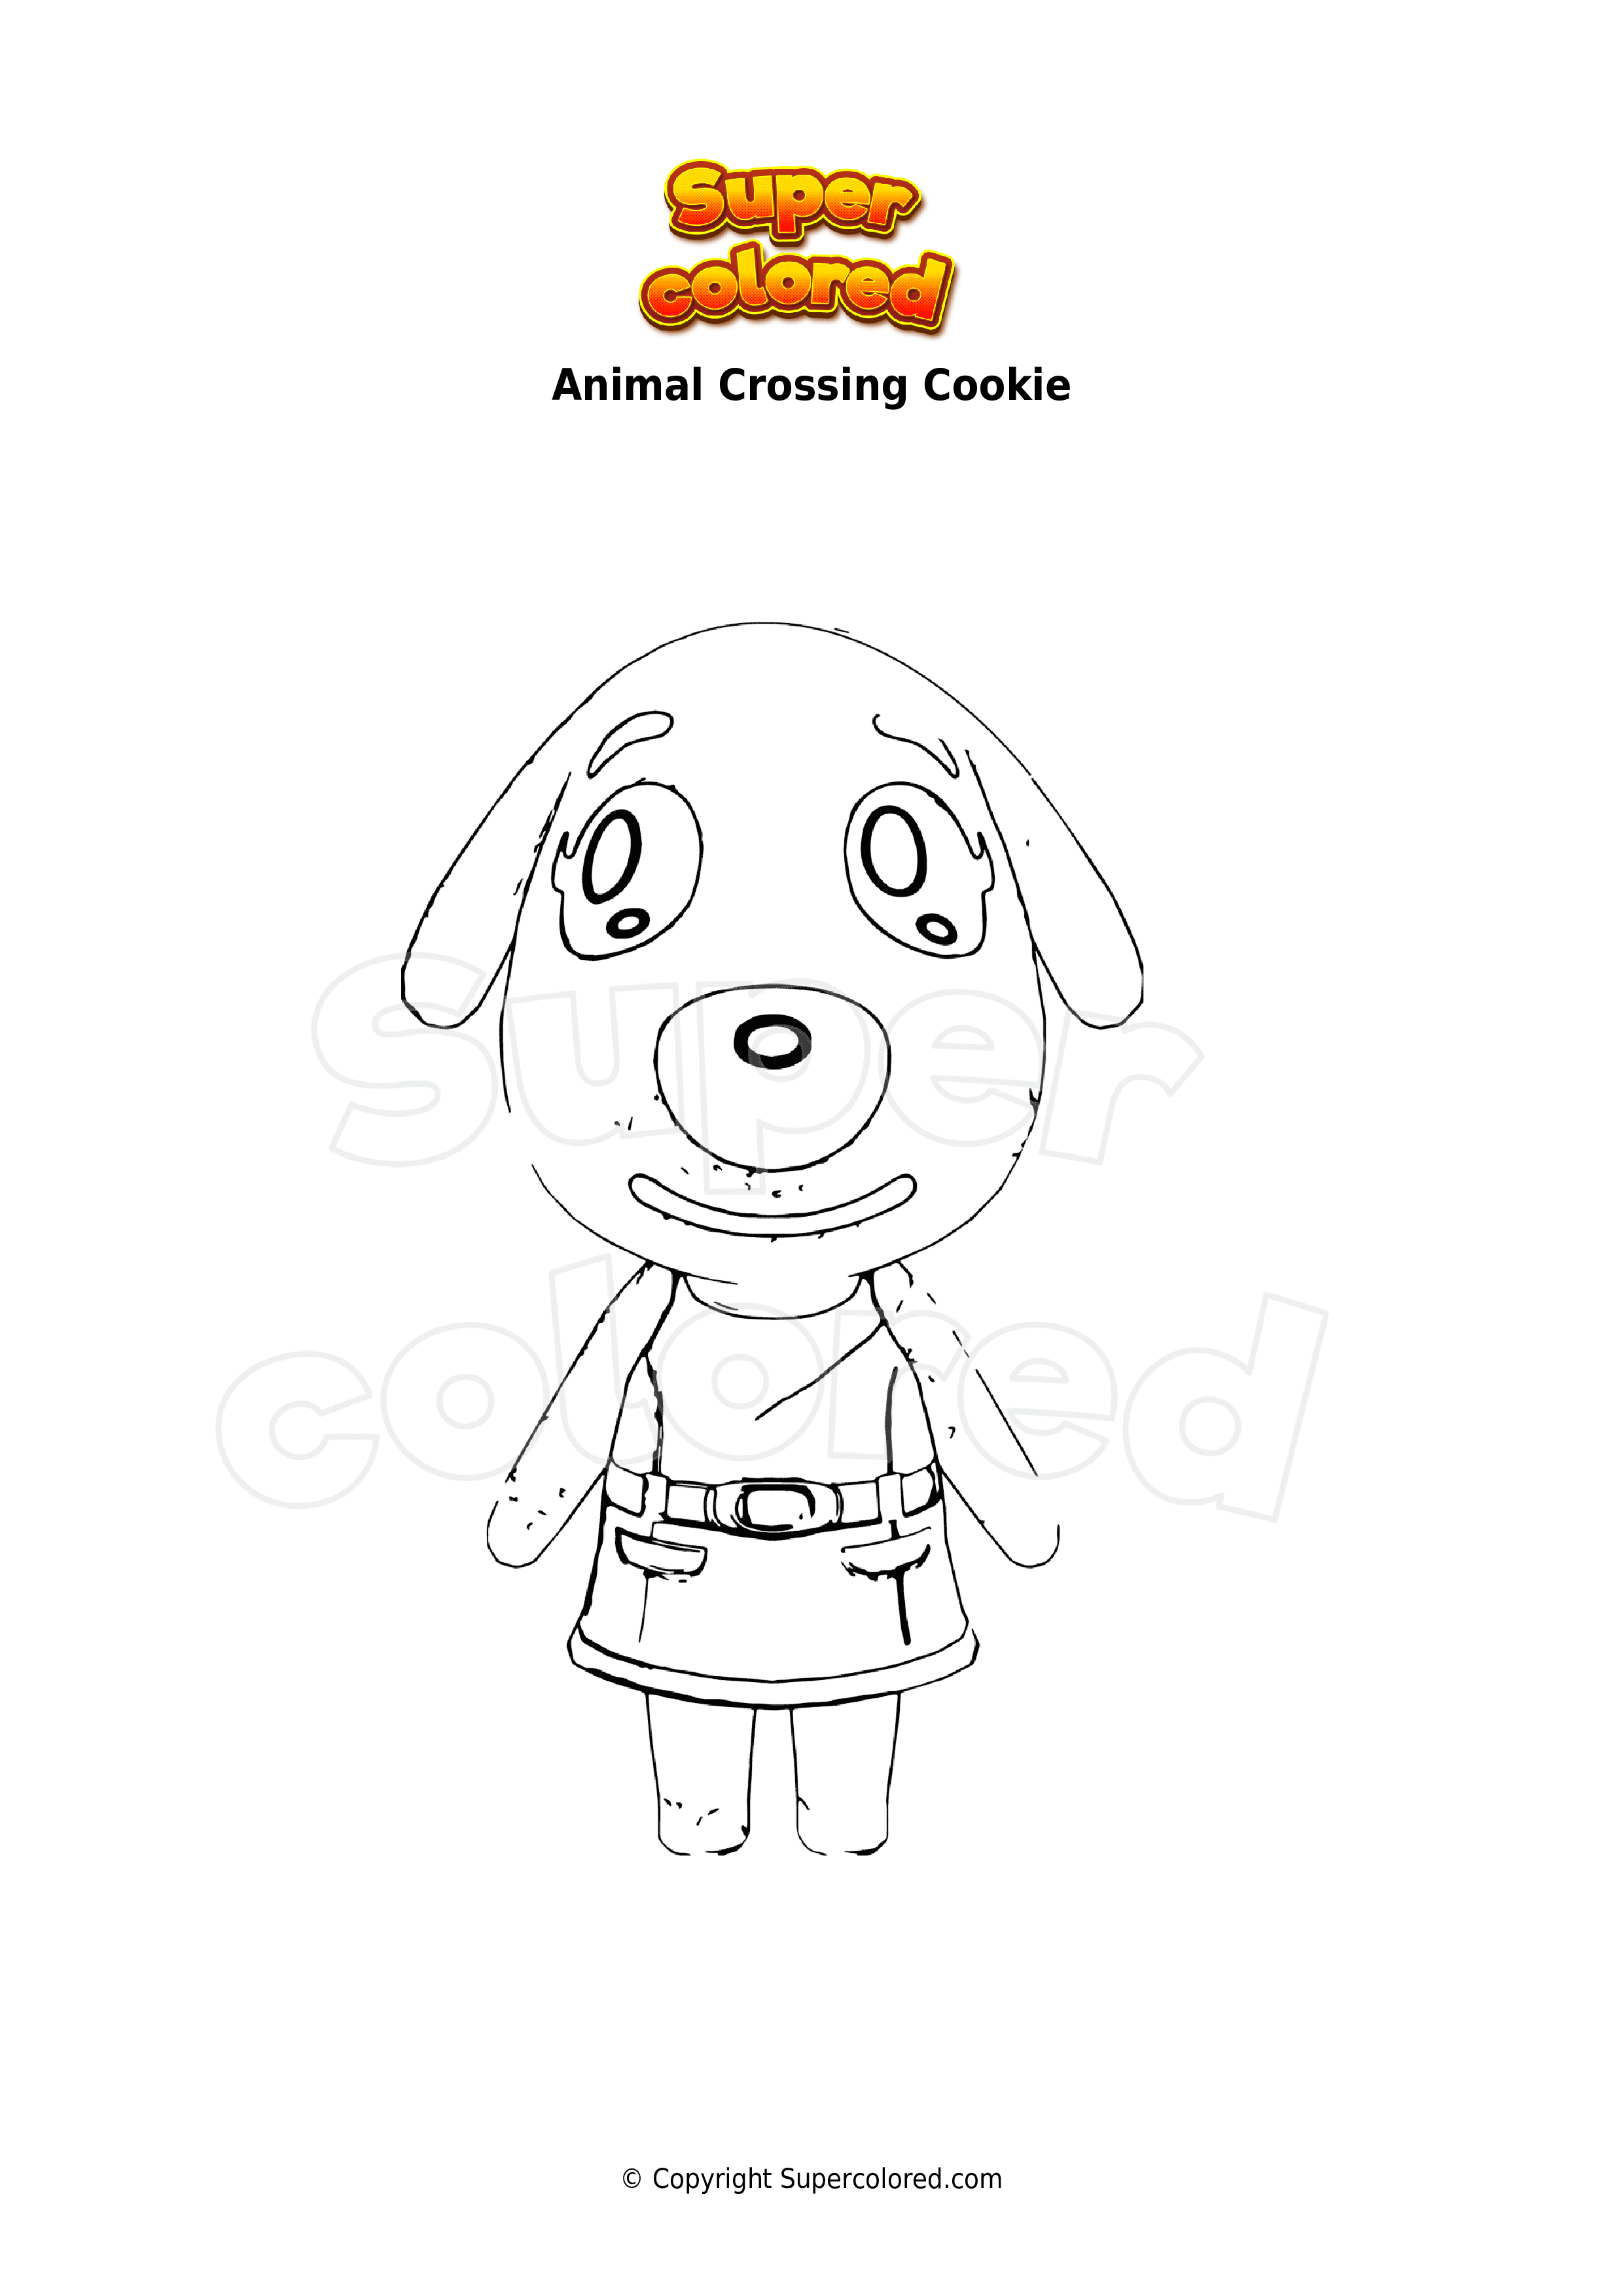 Coloring page Animal Crossing Cookie   Supercolored.com